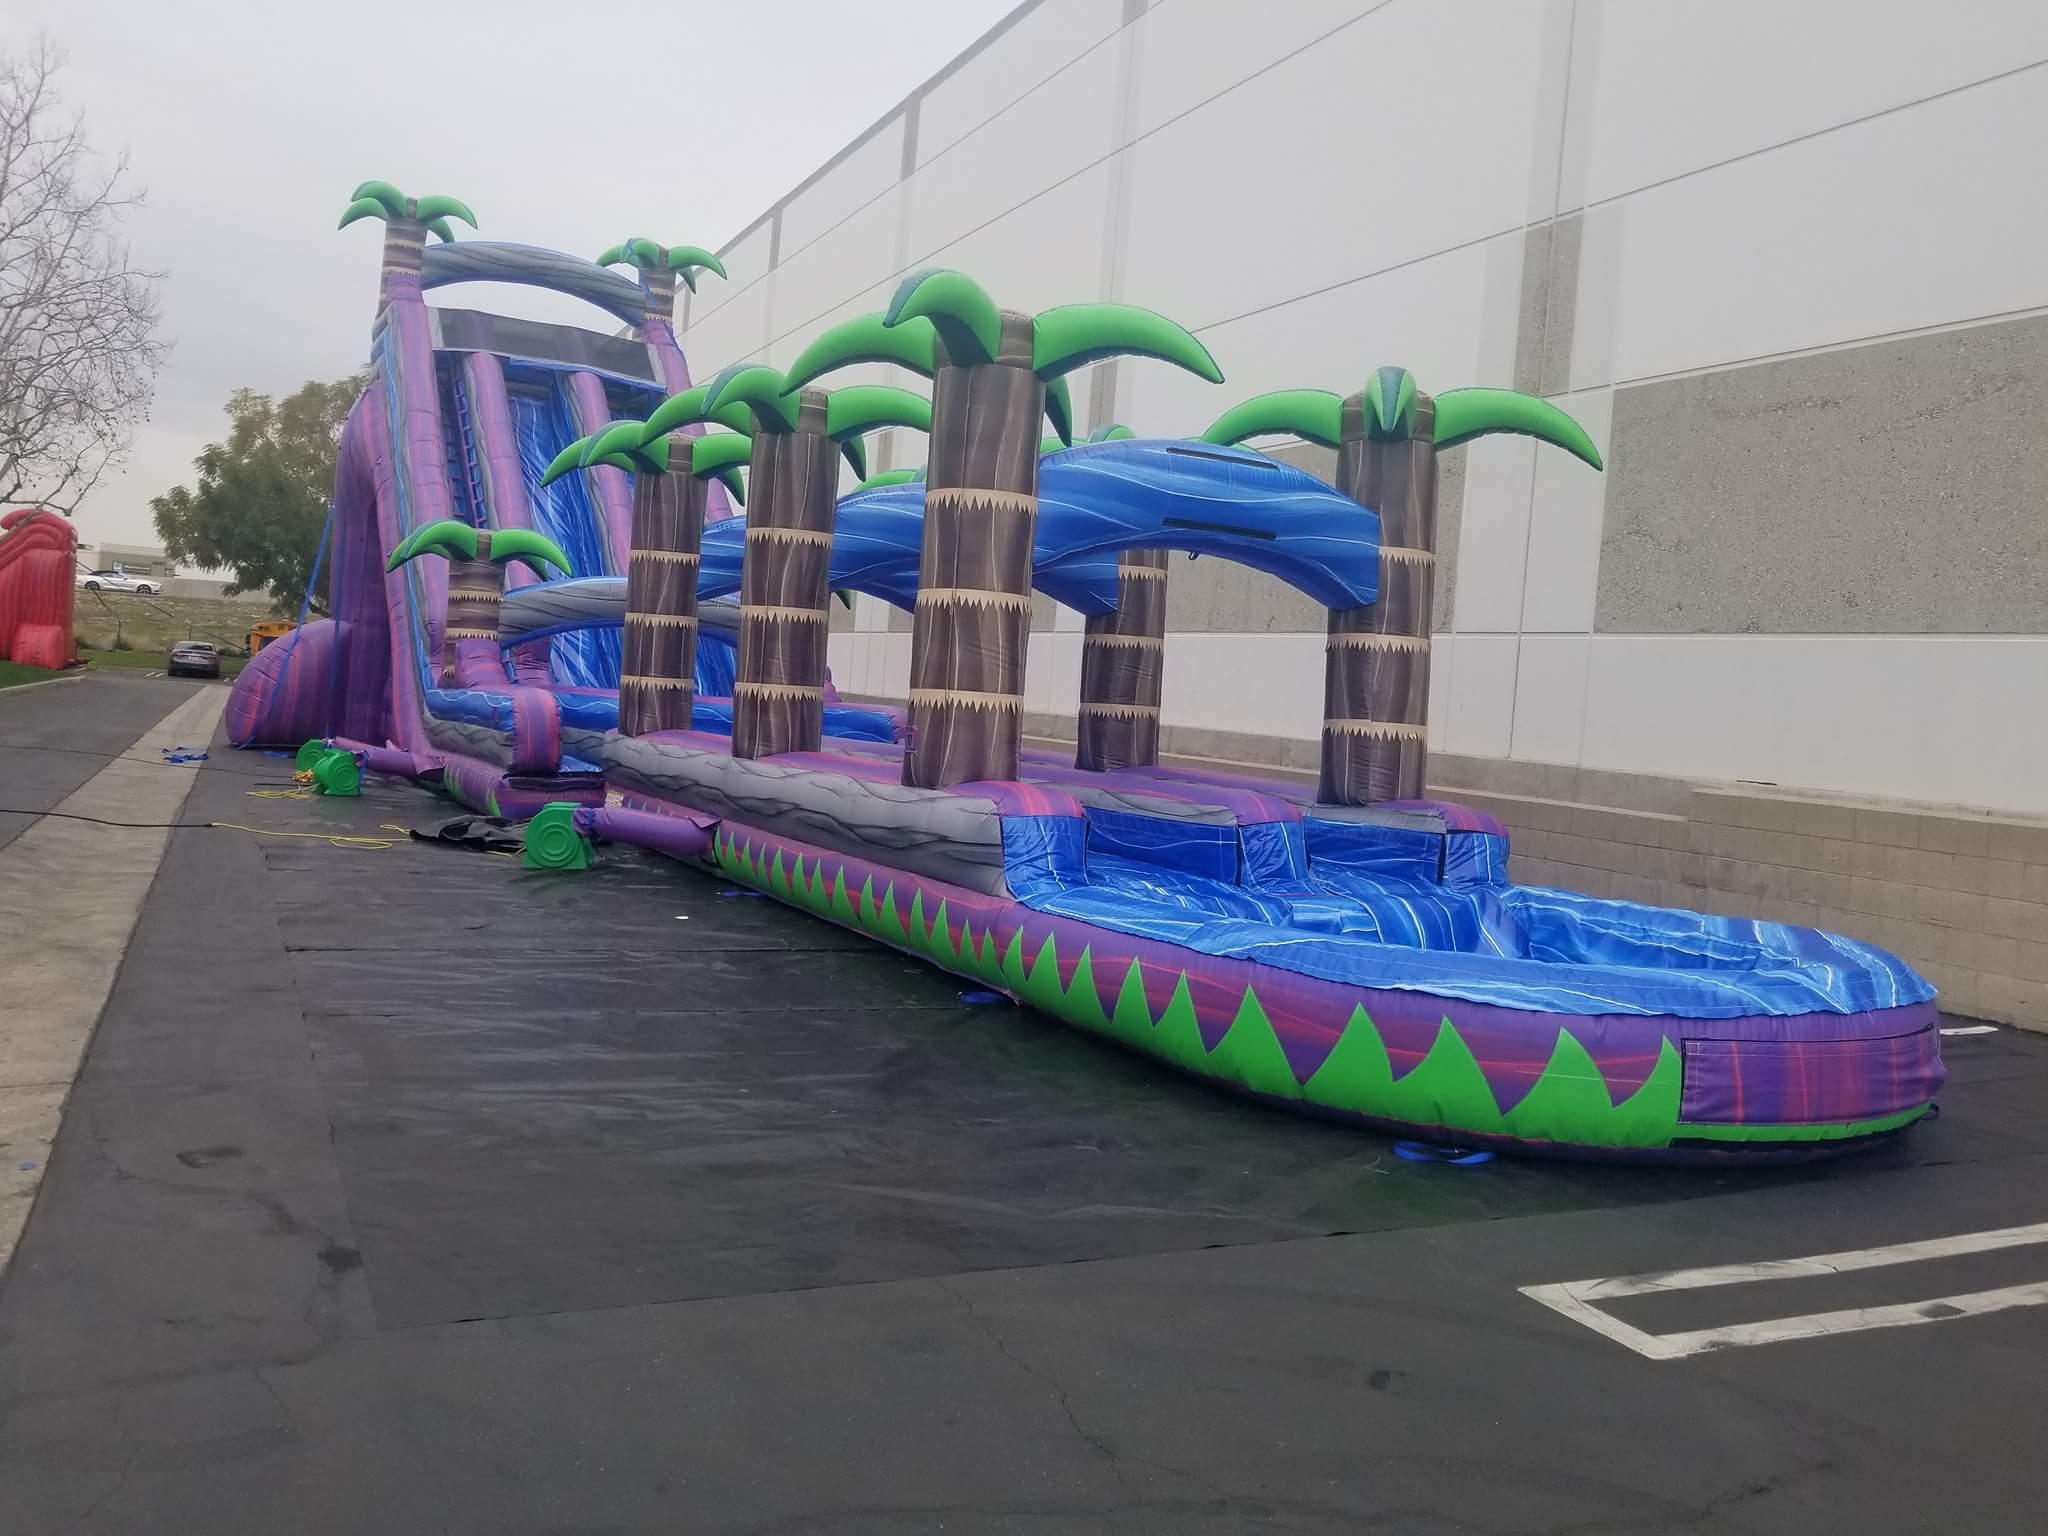 Purple water slide rentals at Jump And Slide Entertainment.Long Islands largest selection of inflatable party rentals along with may carnival party rentals...We offer Tents,tables chairs,food concessions mechanical bull rentals and so much more.